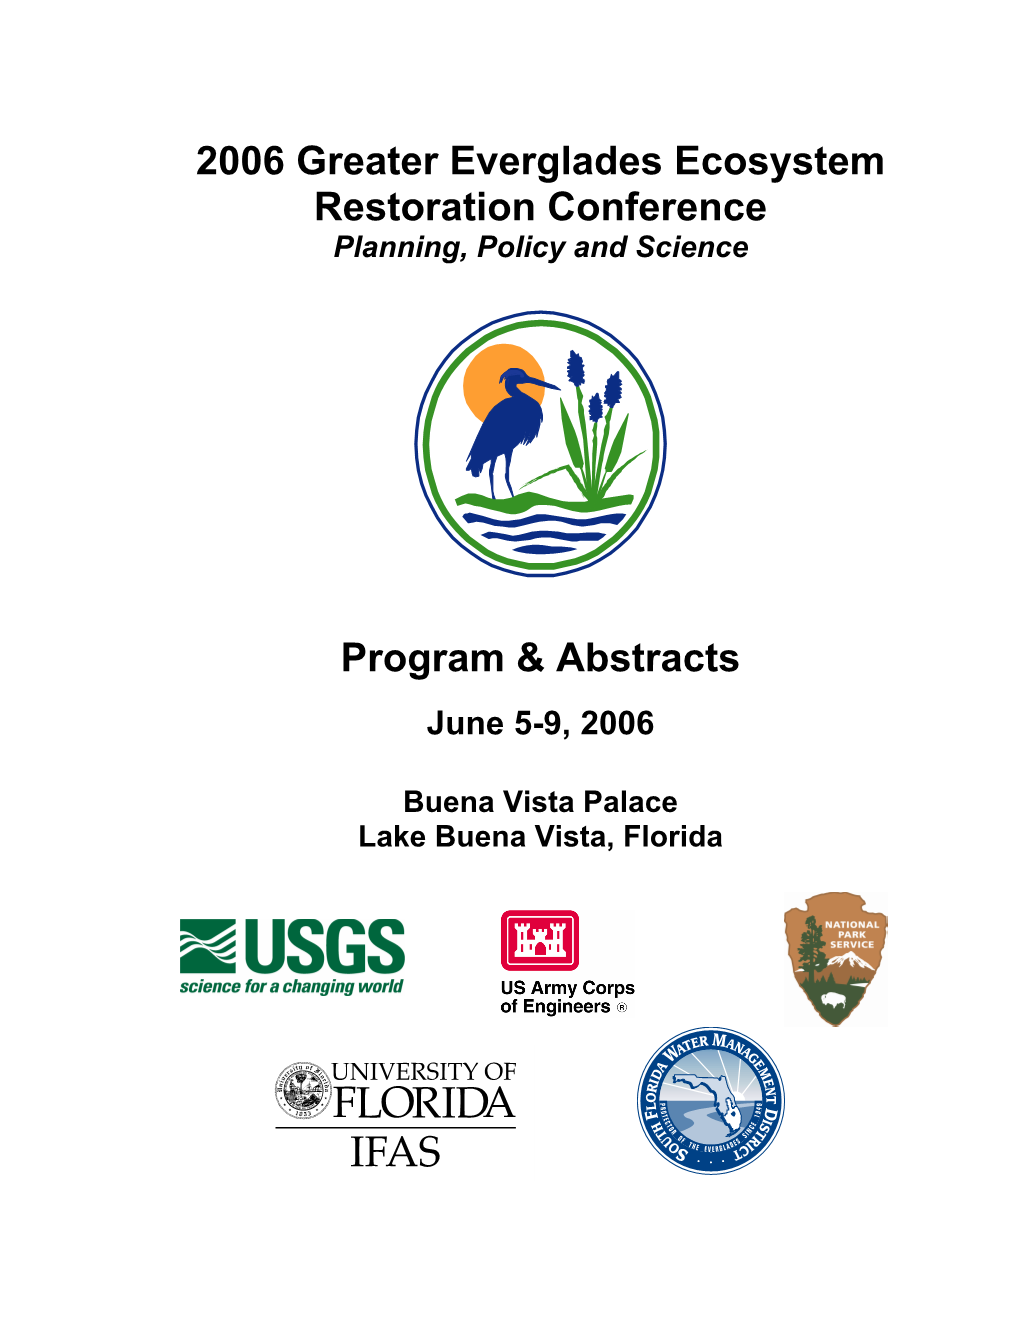 2006 Greater Everglades Ecosystem Restoration Conference Program & Abstracts